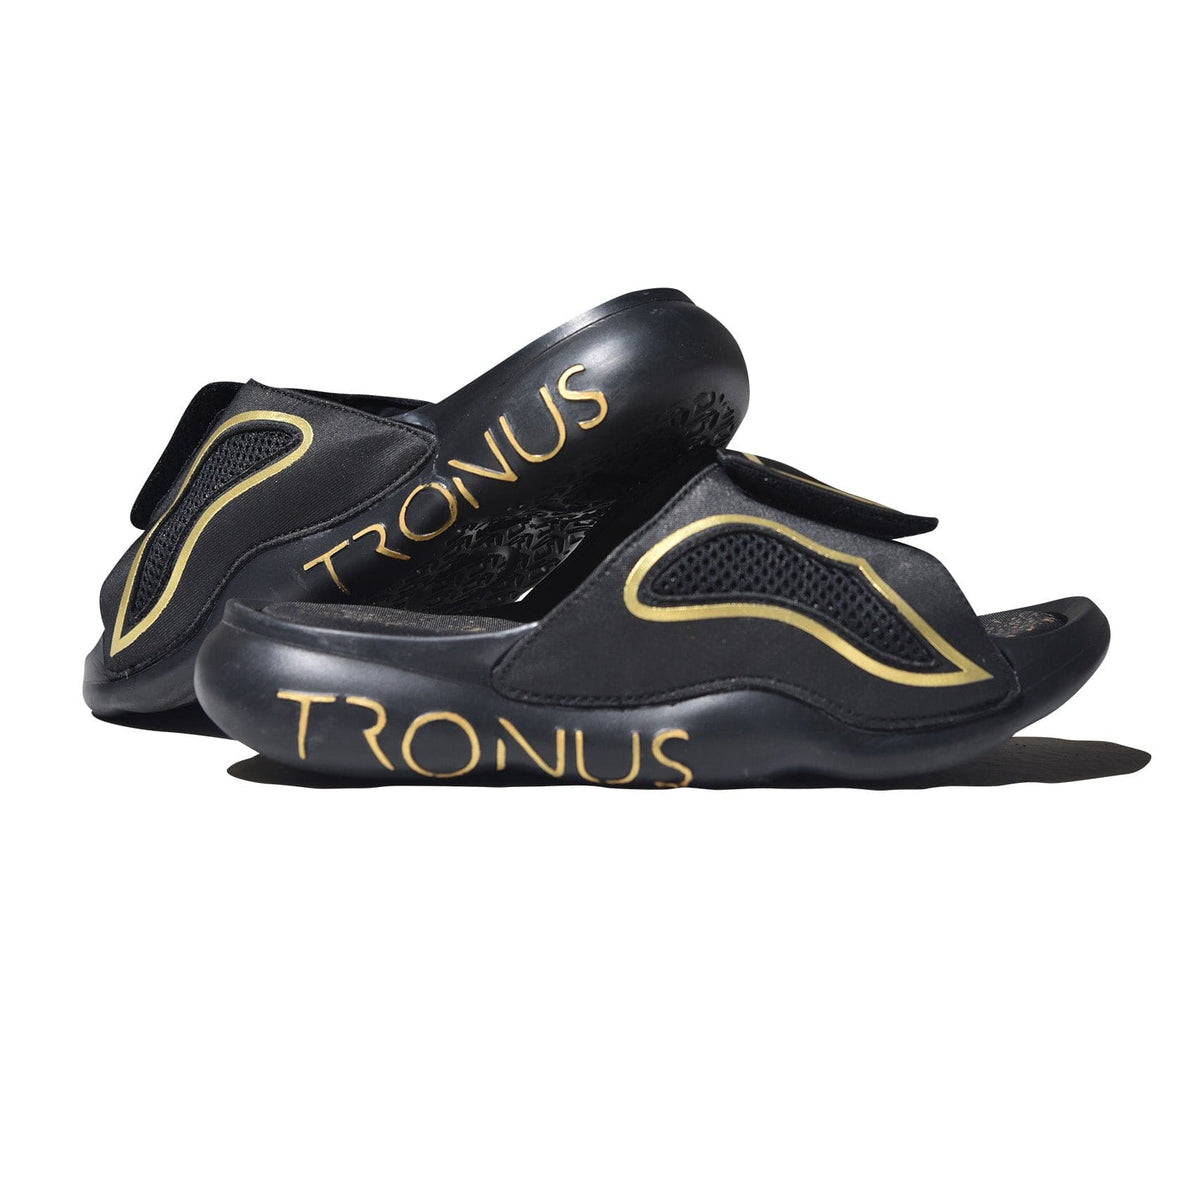 TRONUS Blackout Sneakers Trainers Shoes Lightweight Athletic M 17